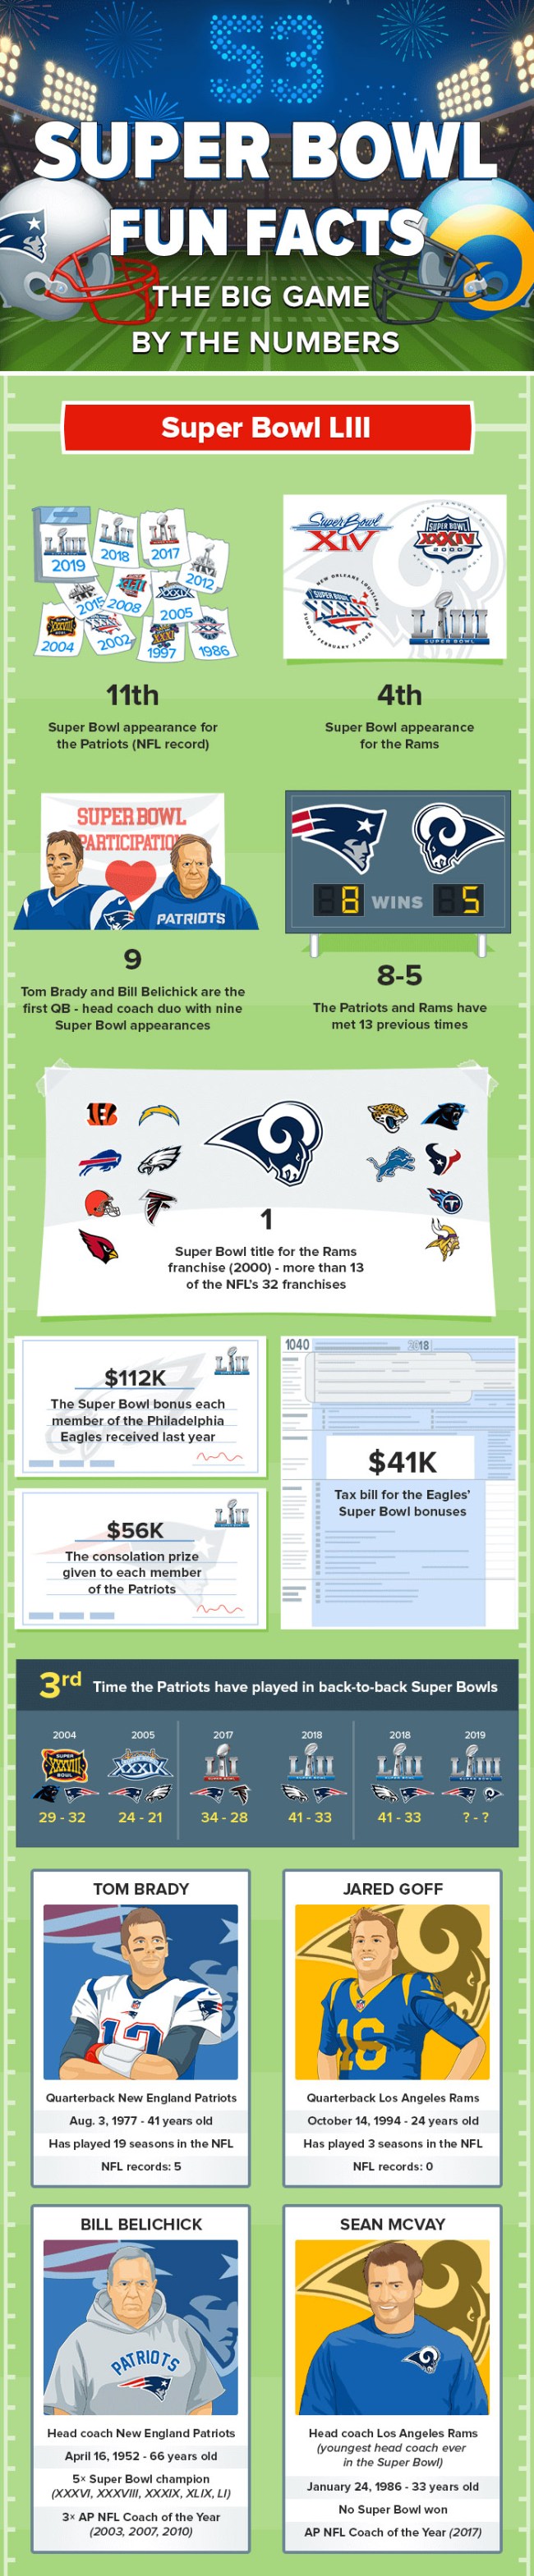 Super Bowl LIII By The Numbers Tickets, Food, Ads, Economics, Media, Betting And More